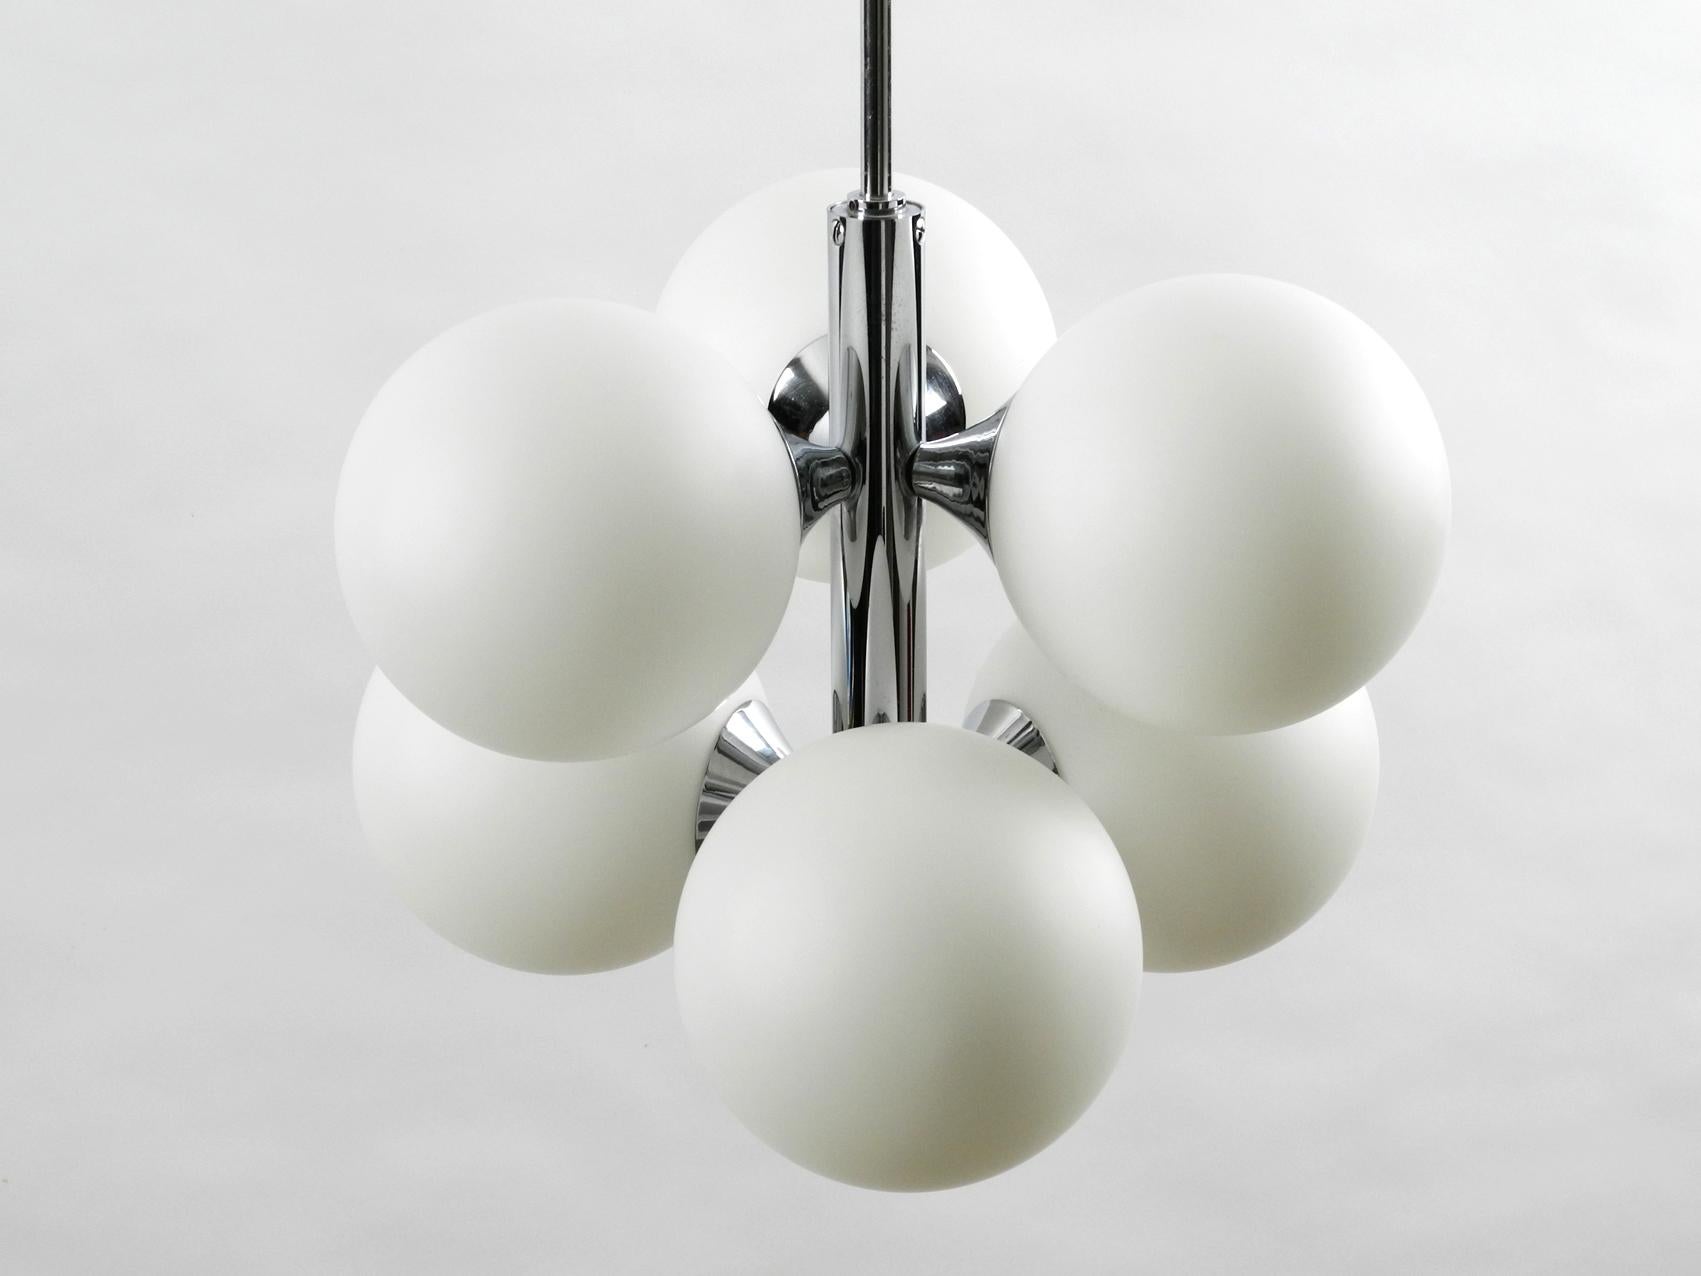 Space Age 1960s Kaiser Chrome-Plated Metal Ceiling Lamp with 6 Opal Glass Balls Sp